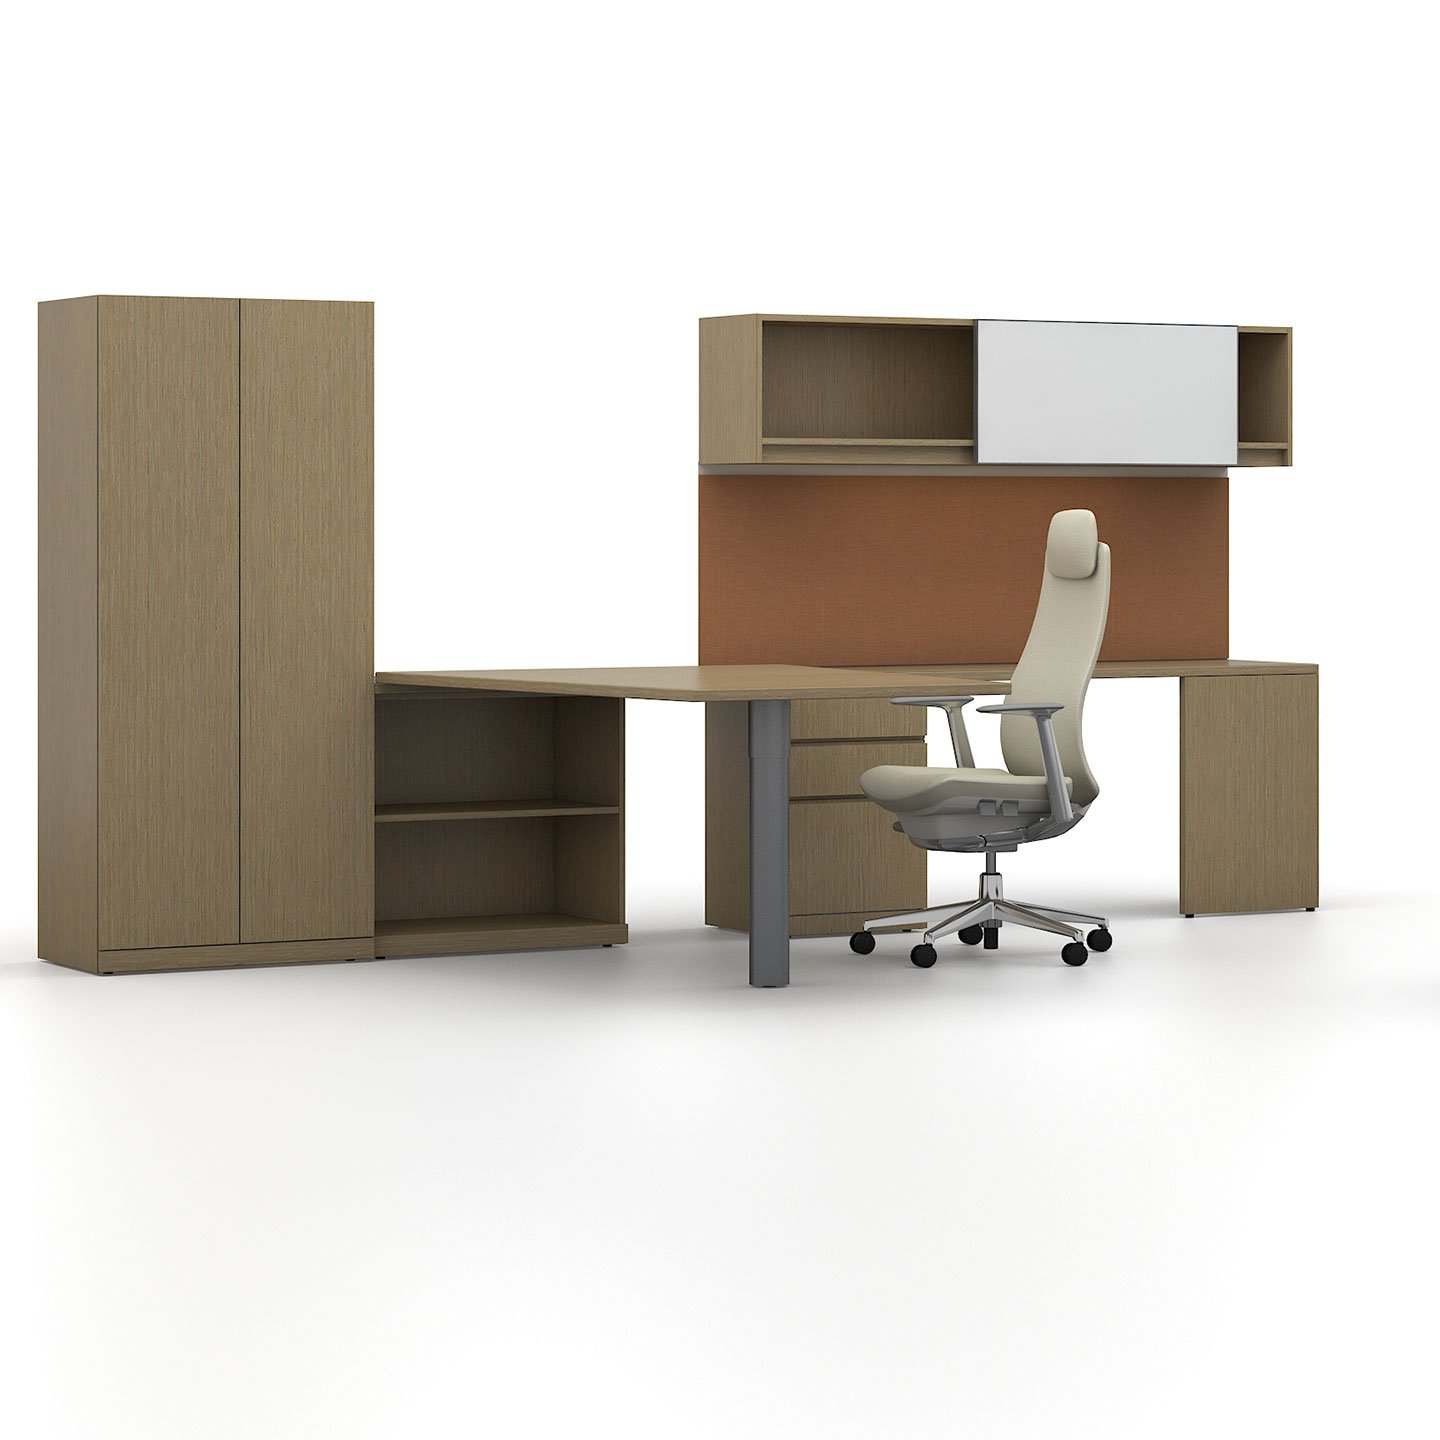 Haworth Masters Series Workspace in wood with multiple storage areas and fern chair